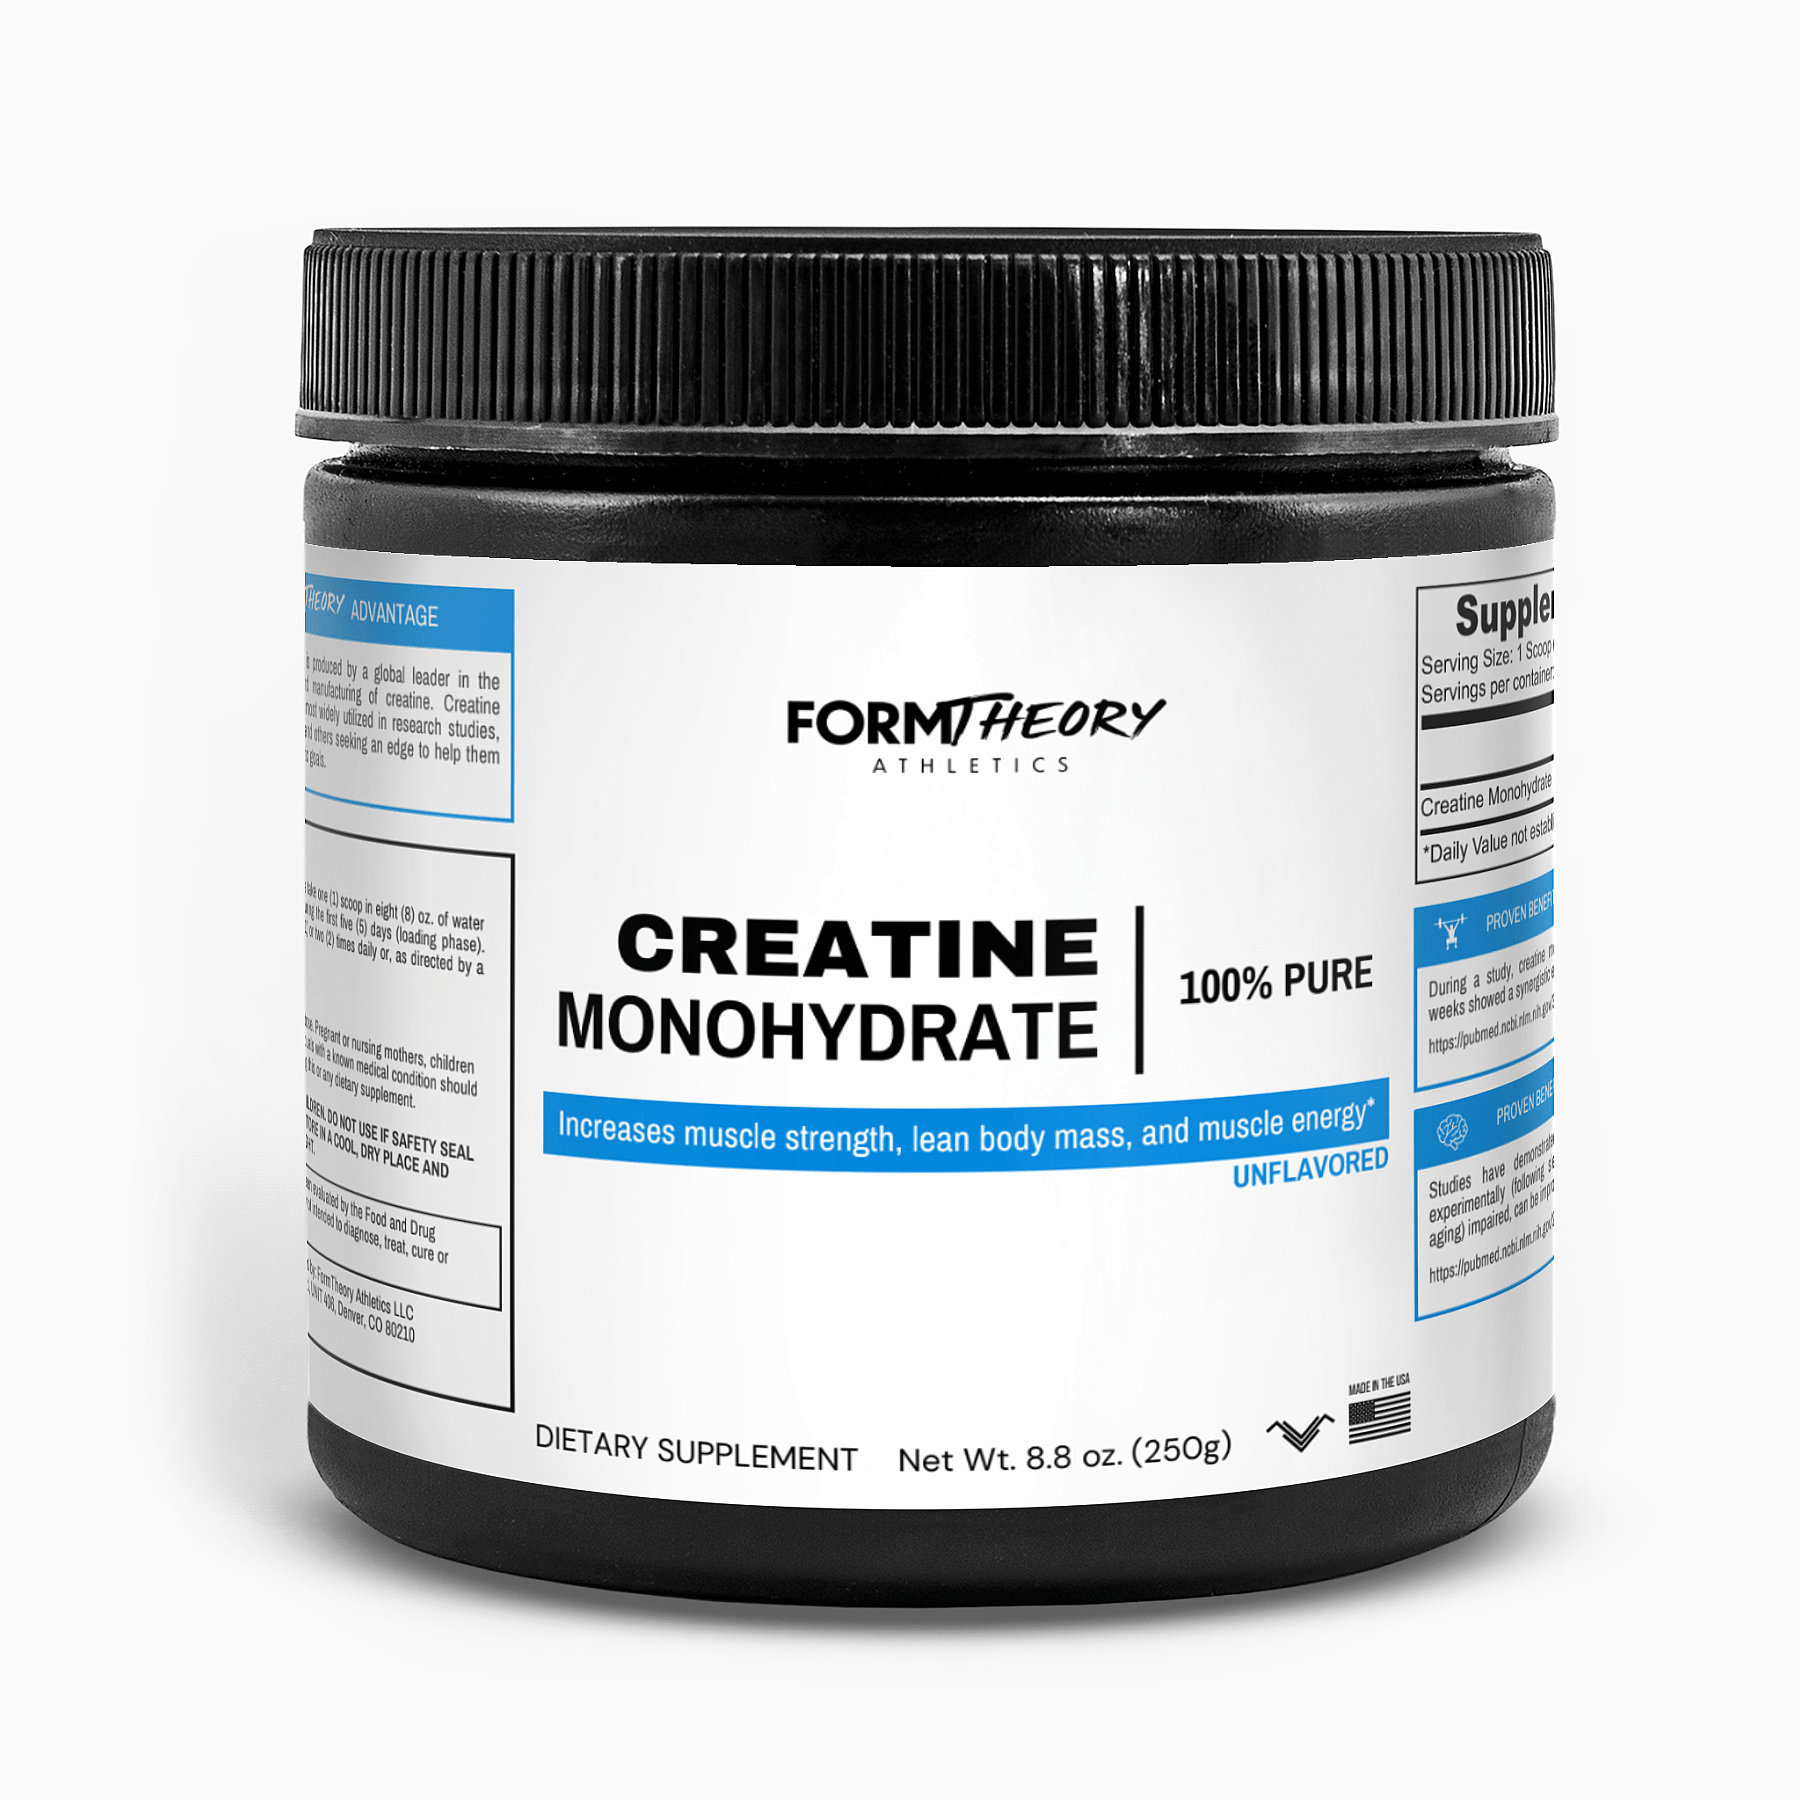 Supplements - FormTheory Athletics